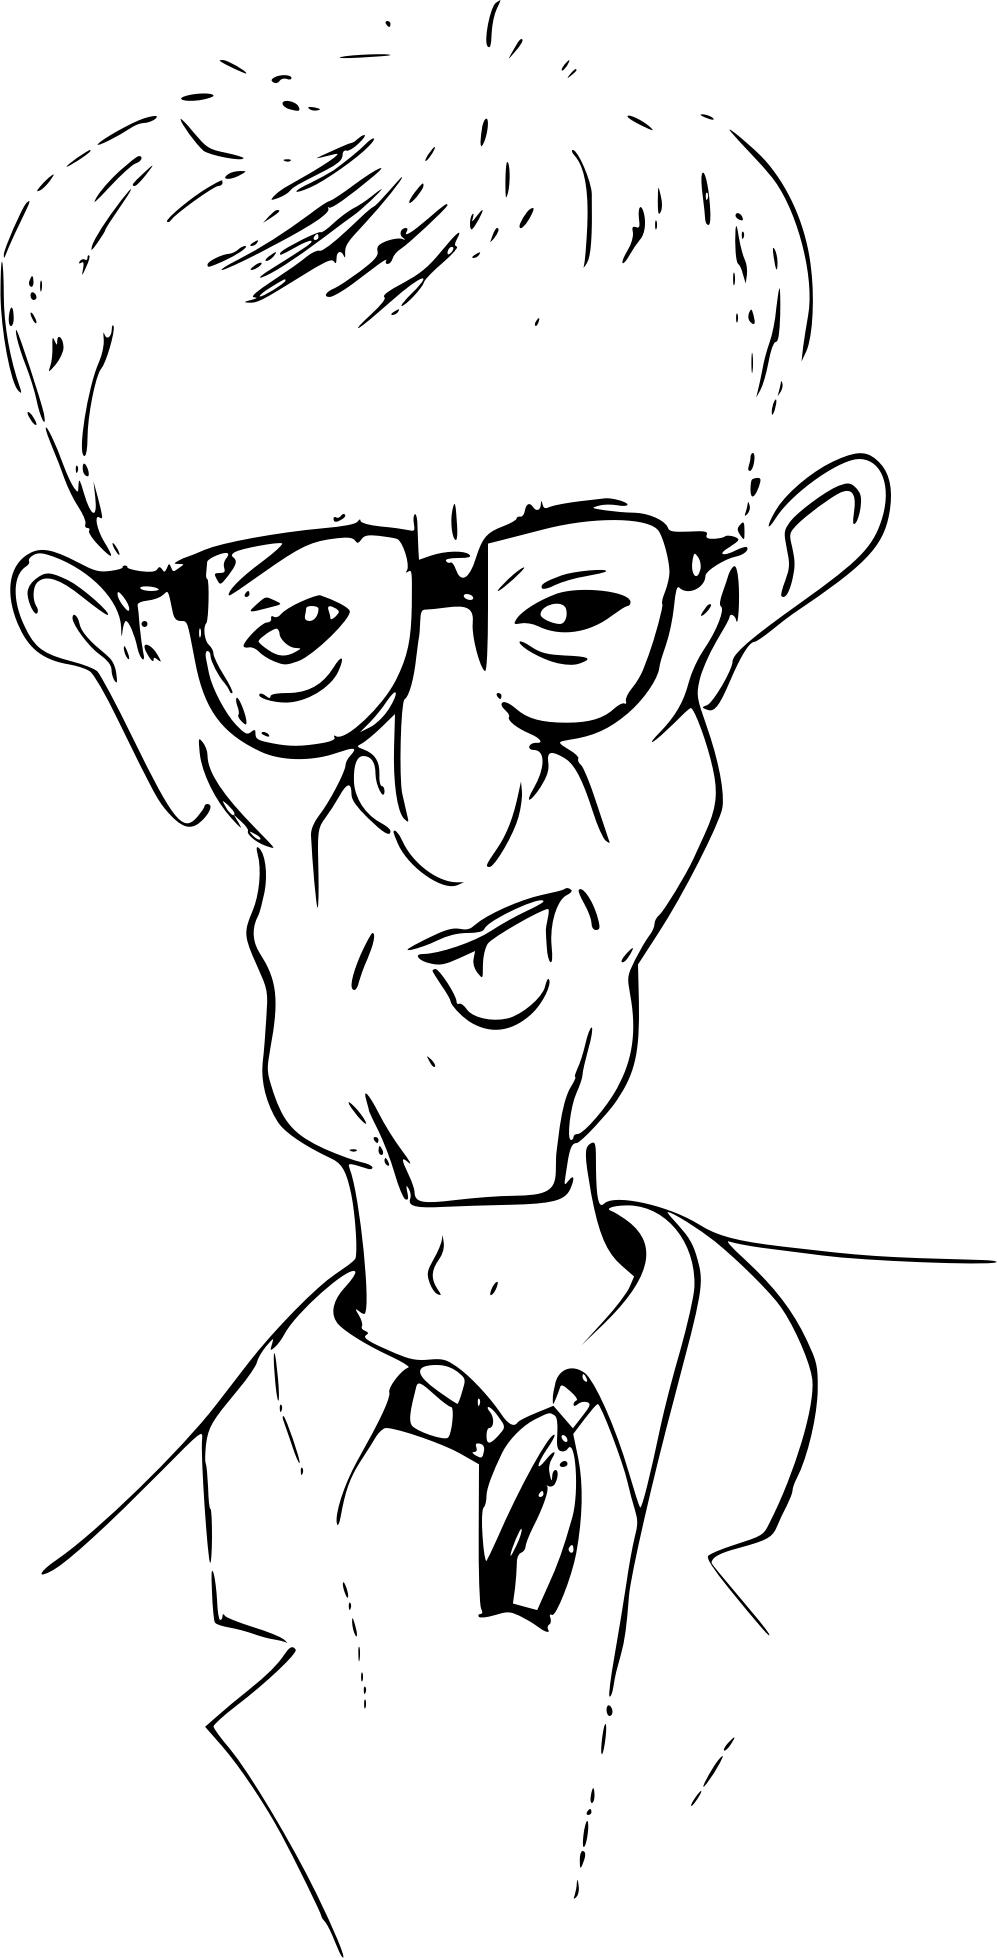 Woody Allen Caricature Outline png